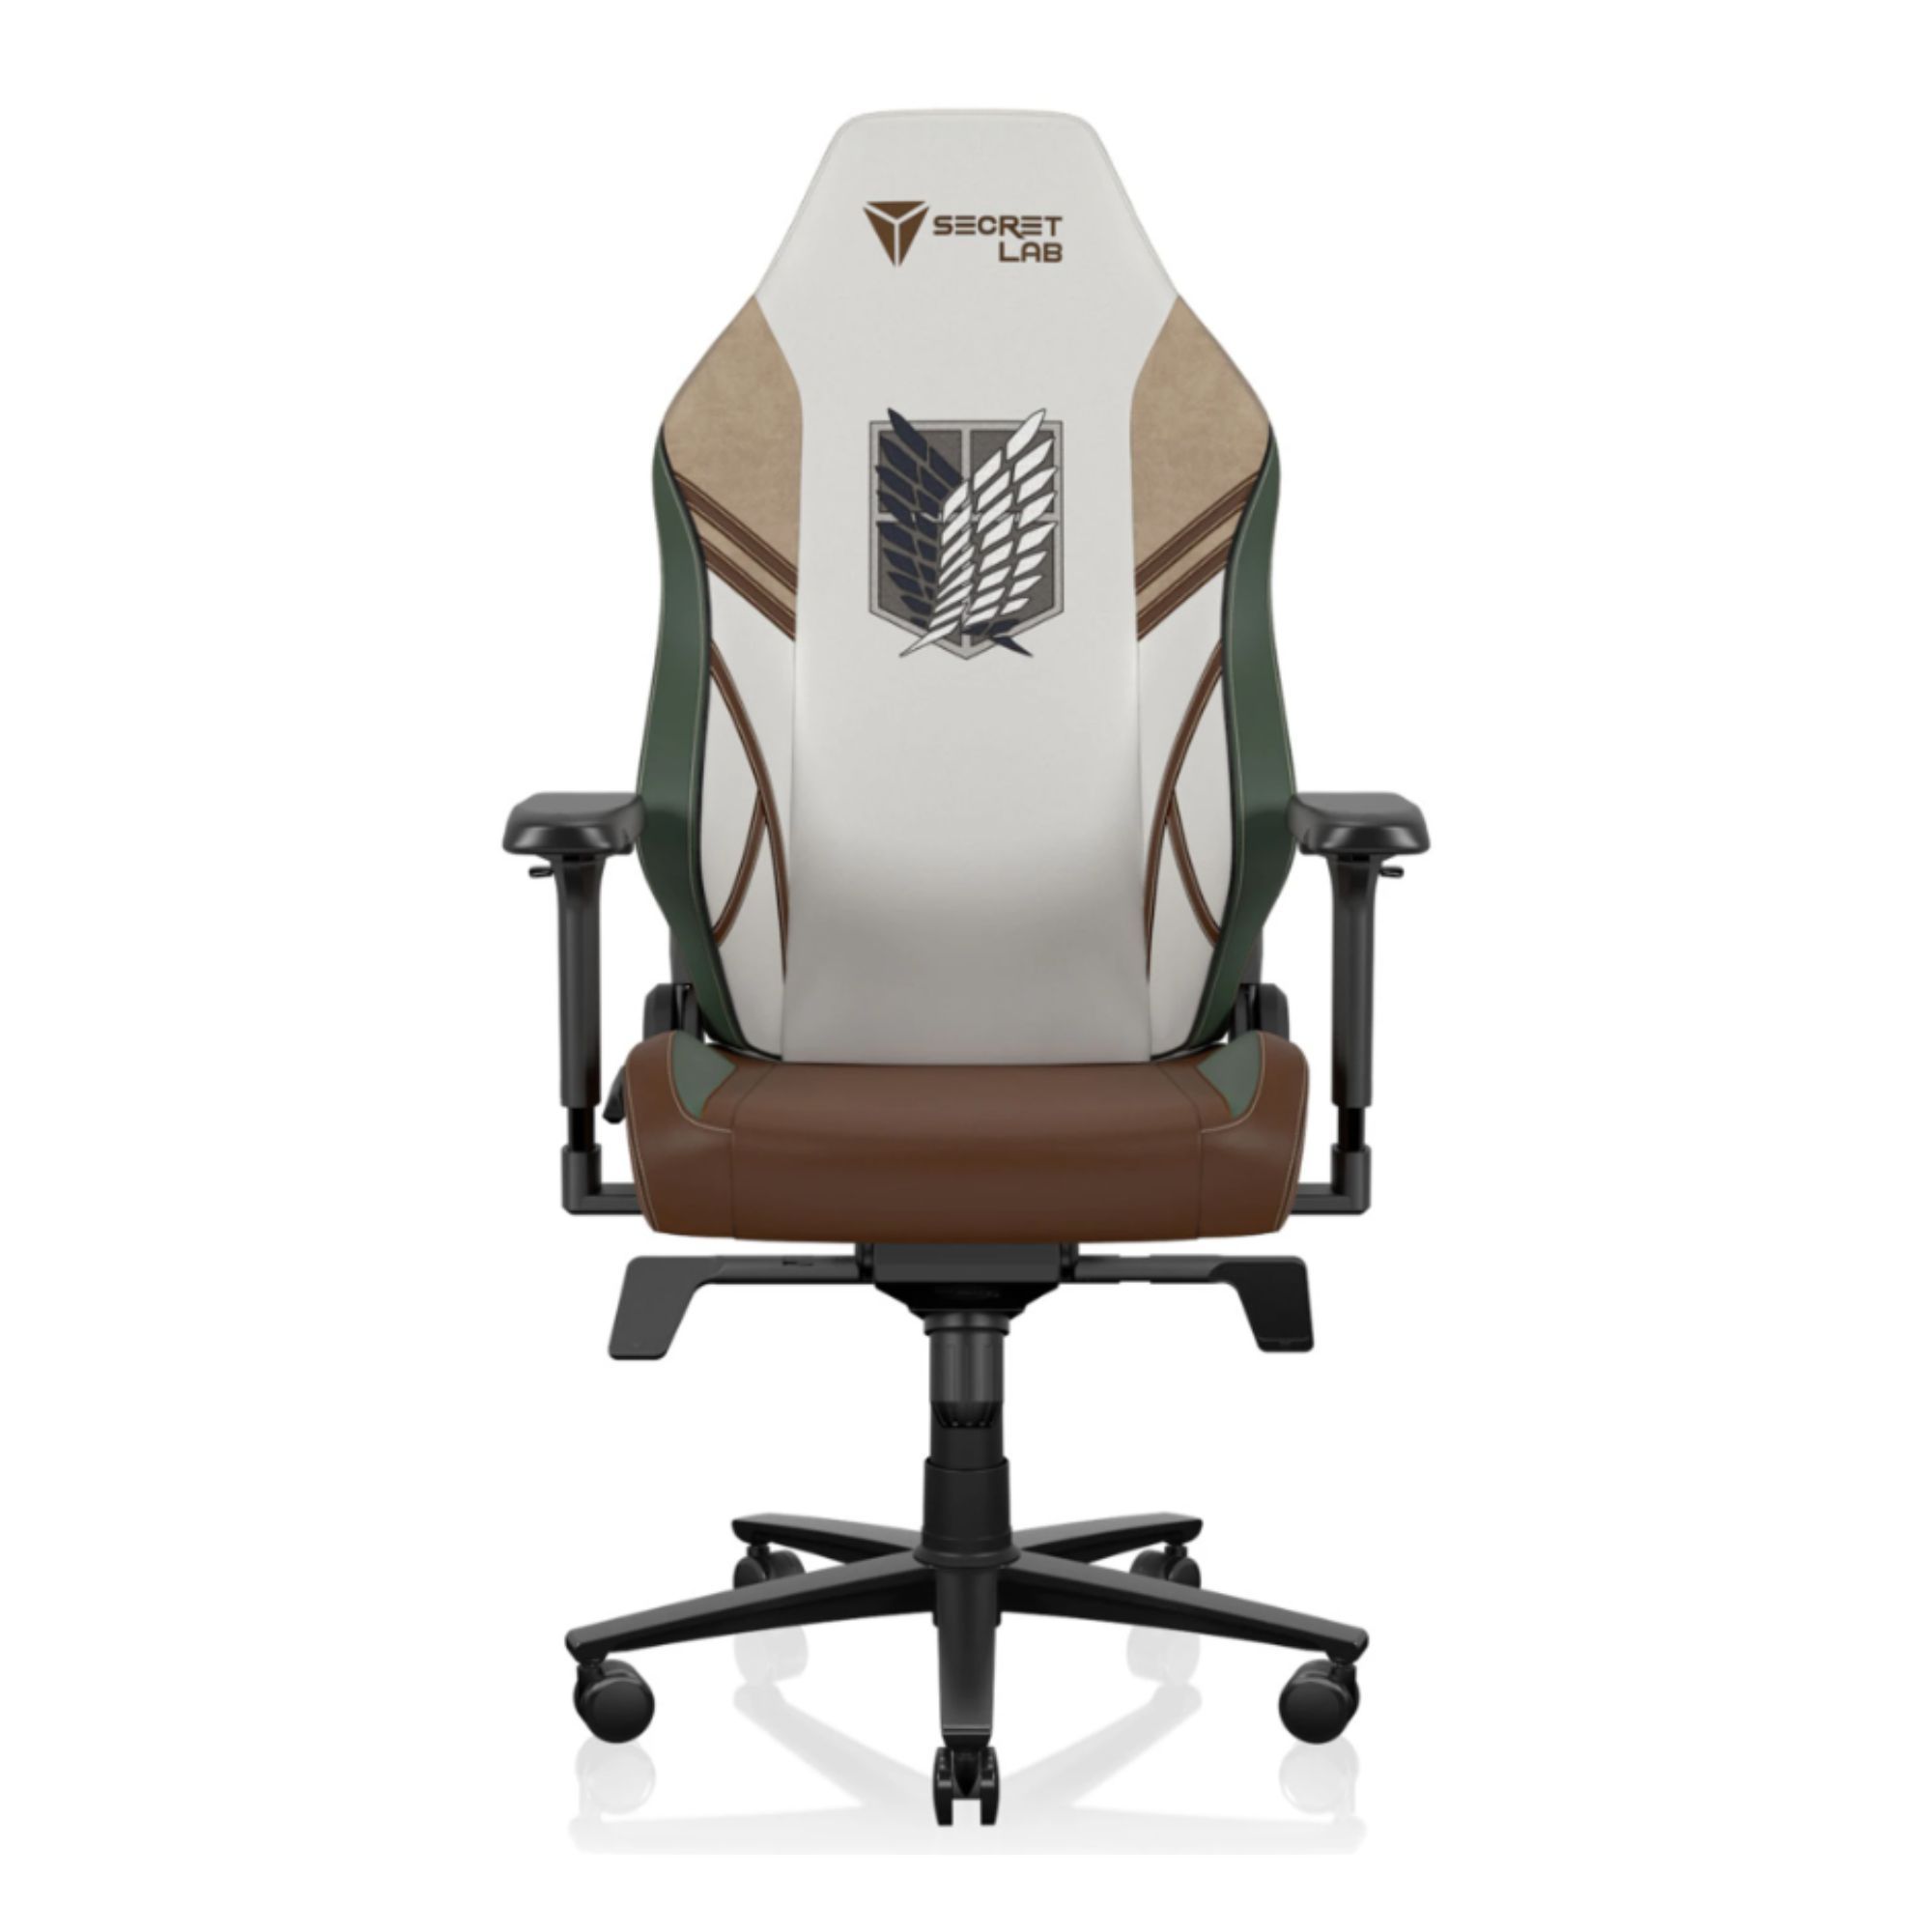 Product still of the Secretlab Titan Evo - Attack on Titan Special Edition on a white background